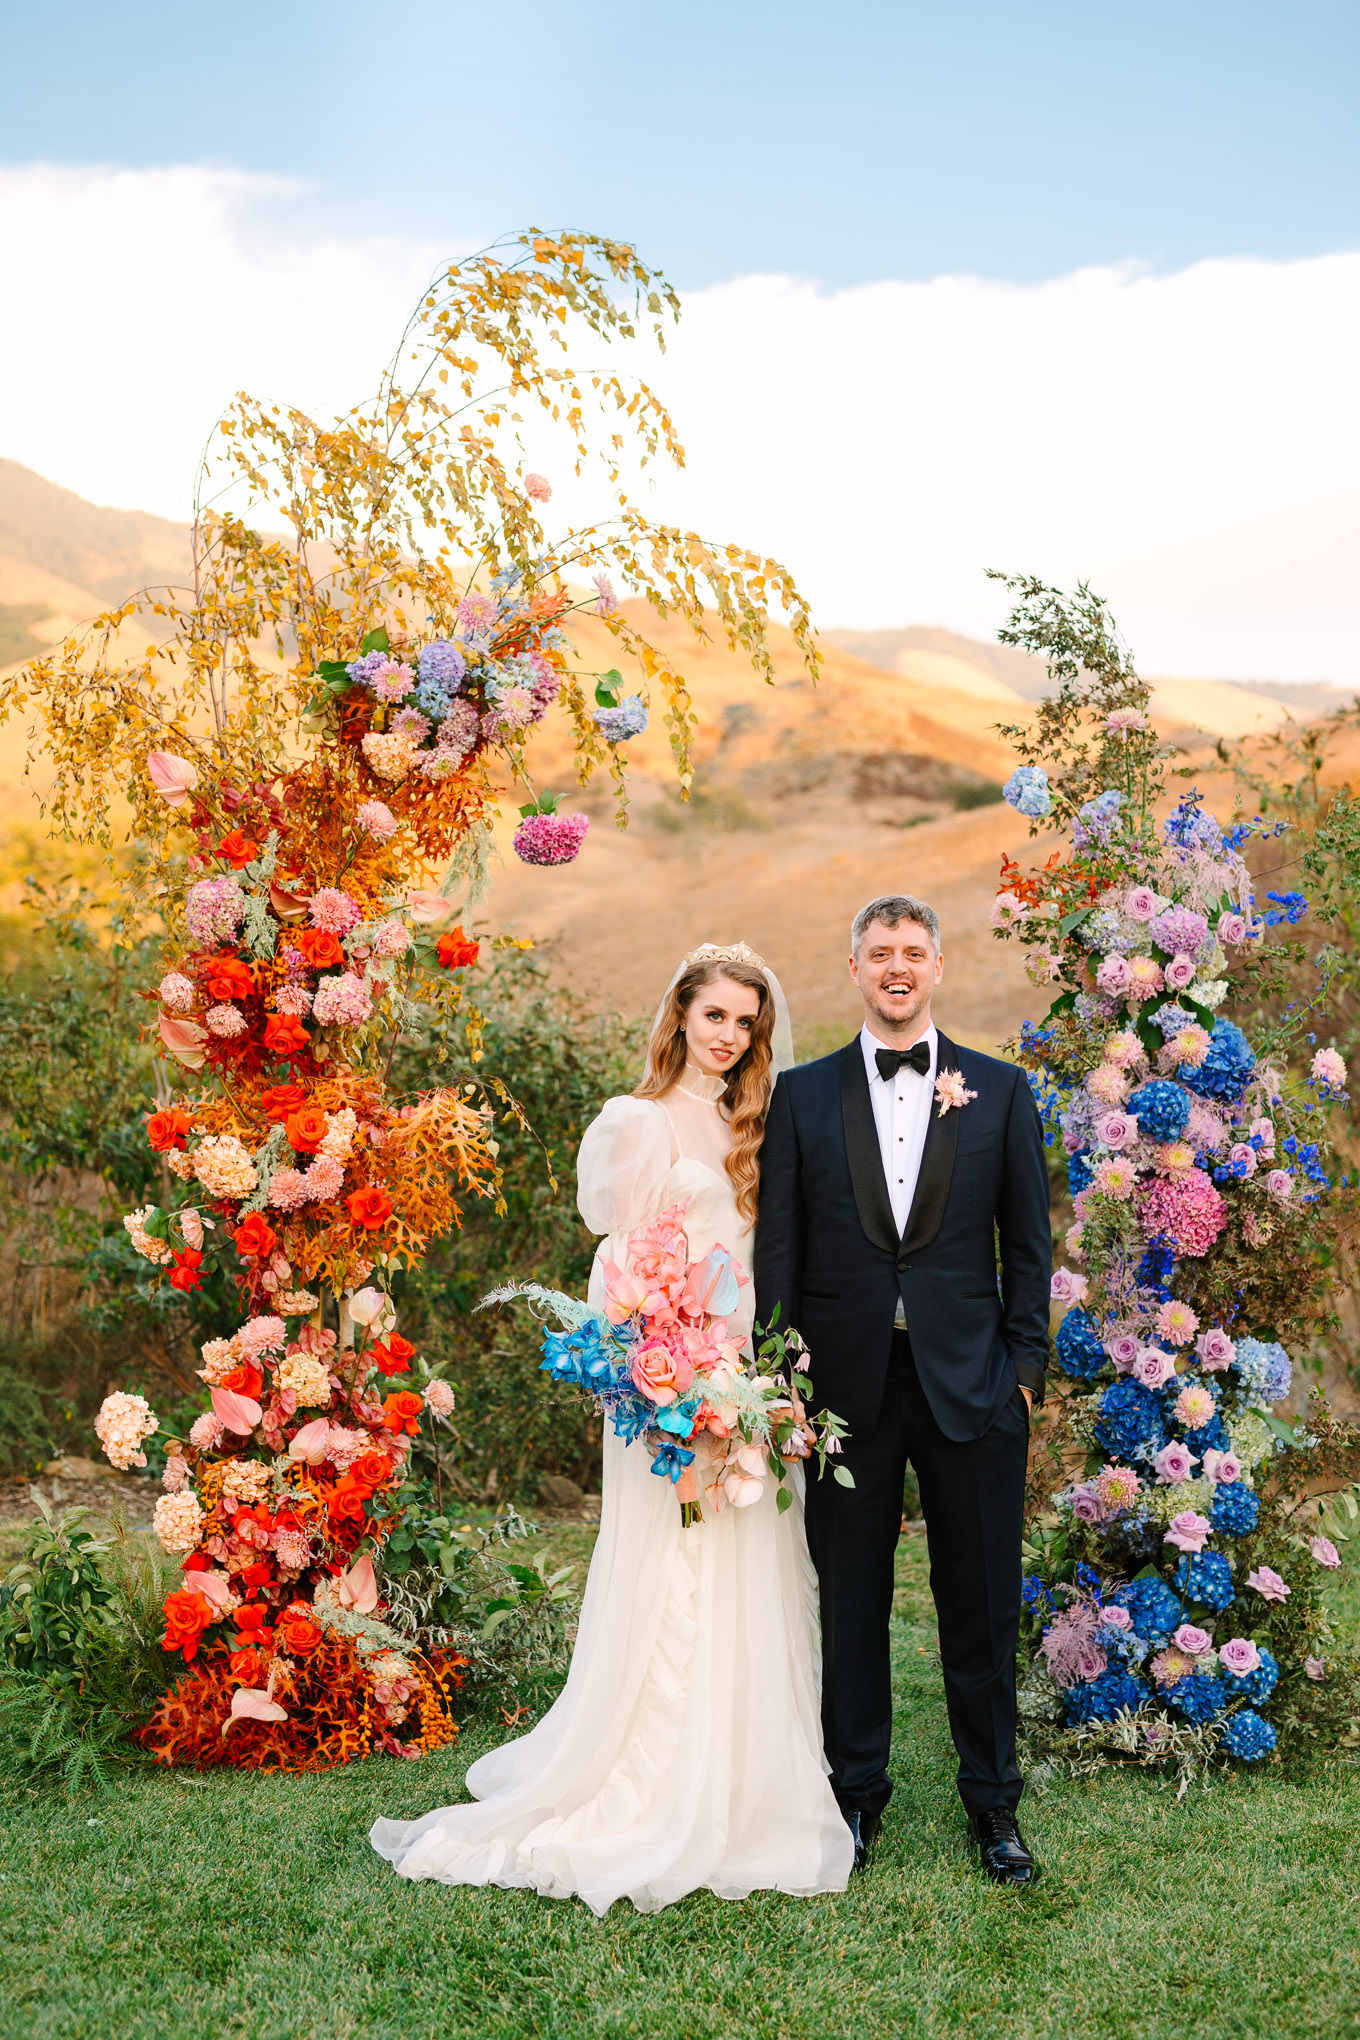 Allison Harvard & Jeremy Burke portraits at floral wedding ceremony installation | Colorful and quirky wedding at Higuera Ranch in San Luis Obispo | #sanluisobispowedding #californiawedding #higueraranch #madonnainn   Source: Mary Costa Photography | Los Angeles